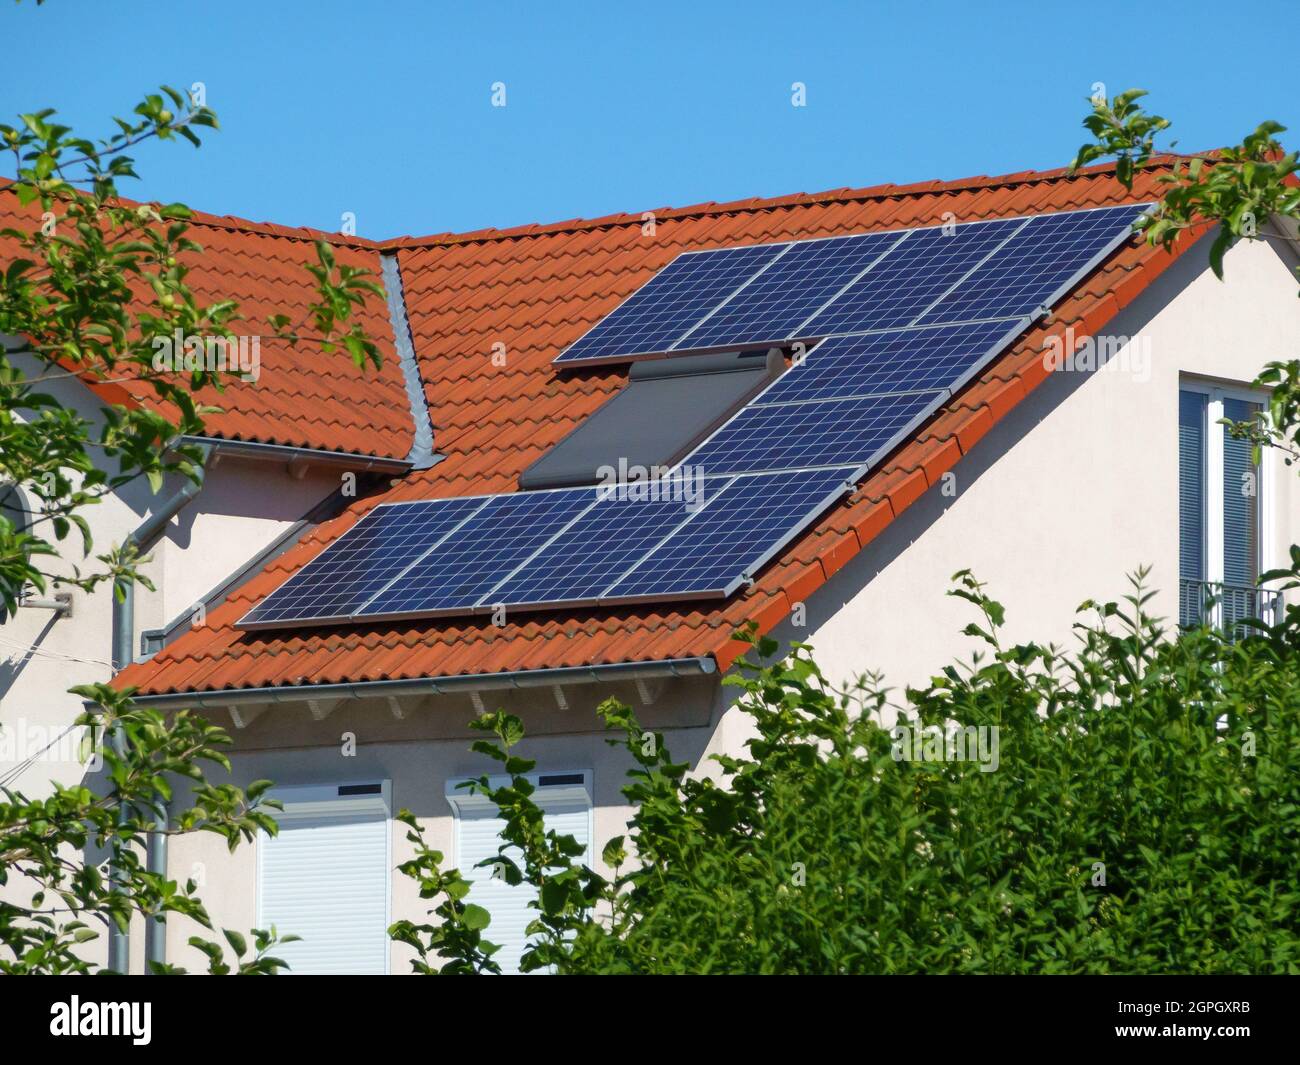 solar panels on a roof in the suburbs Stock Photo